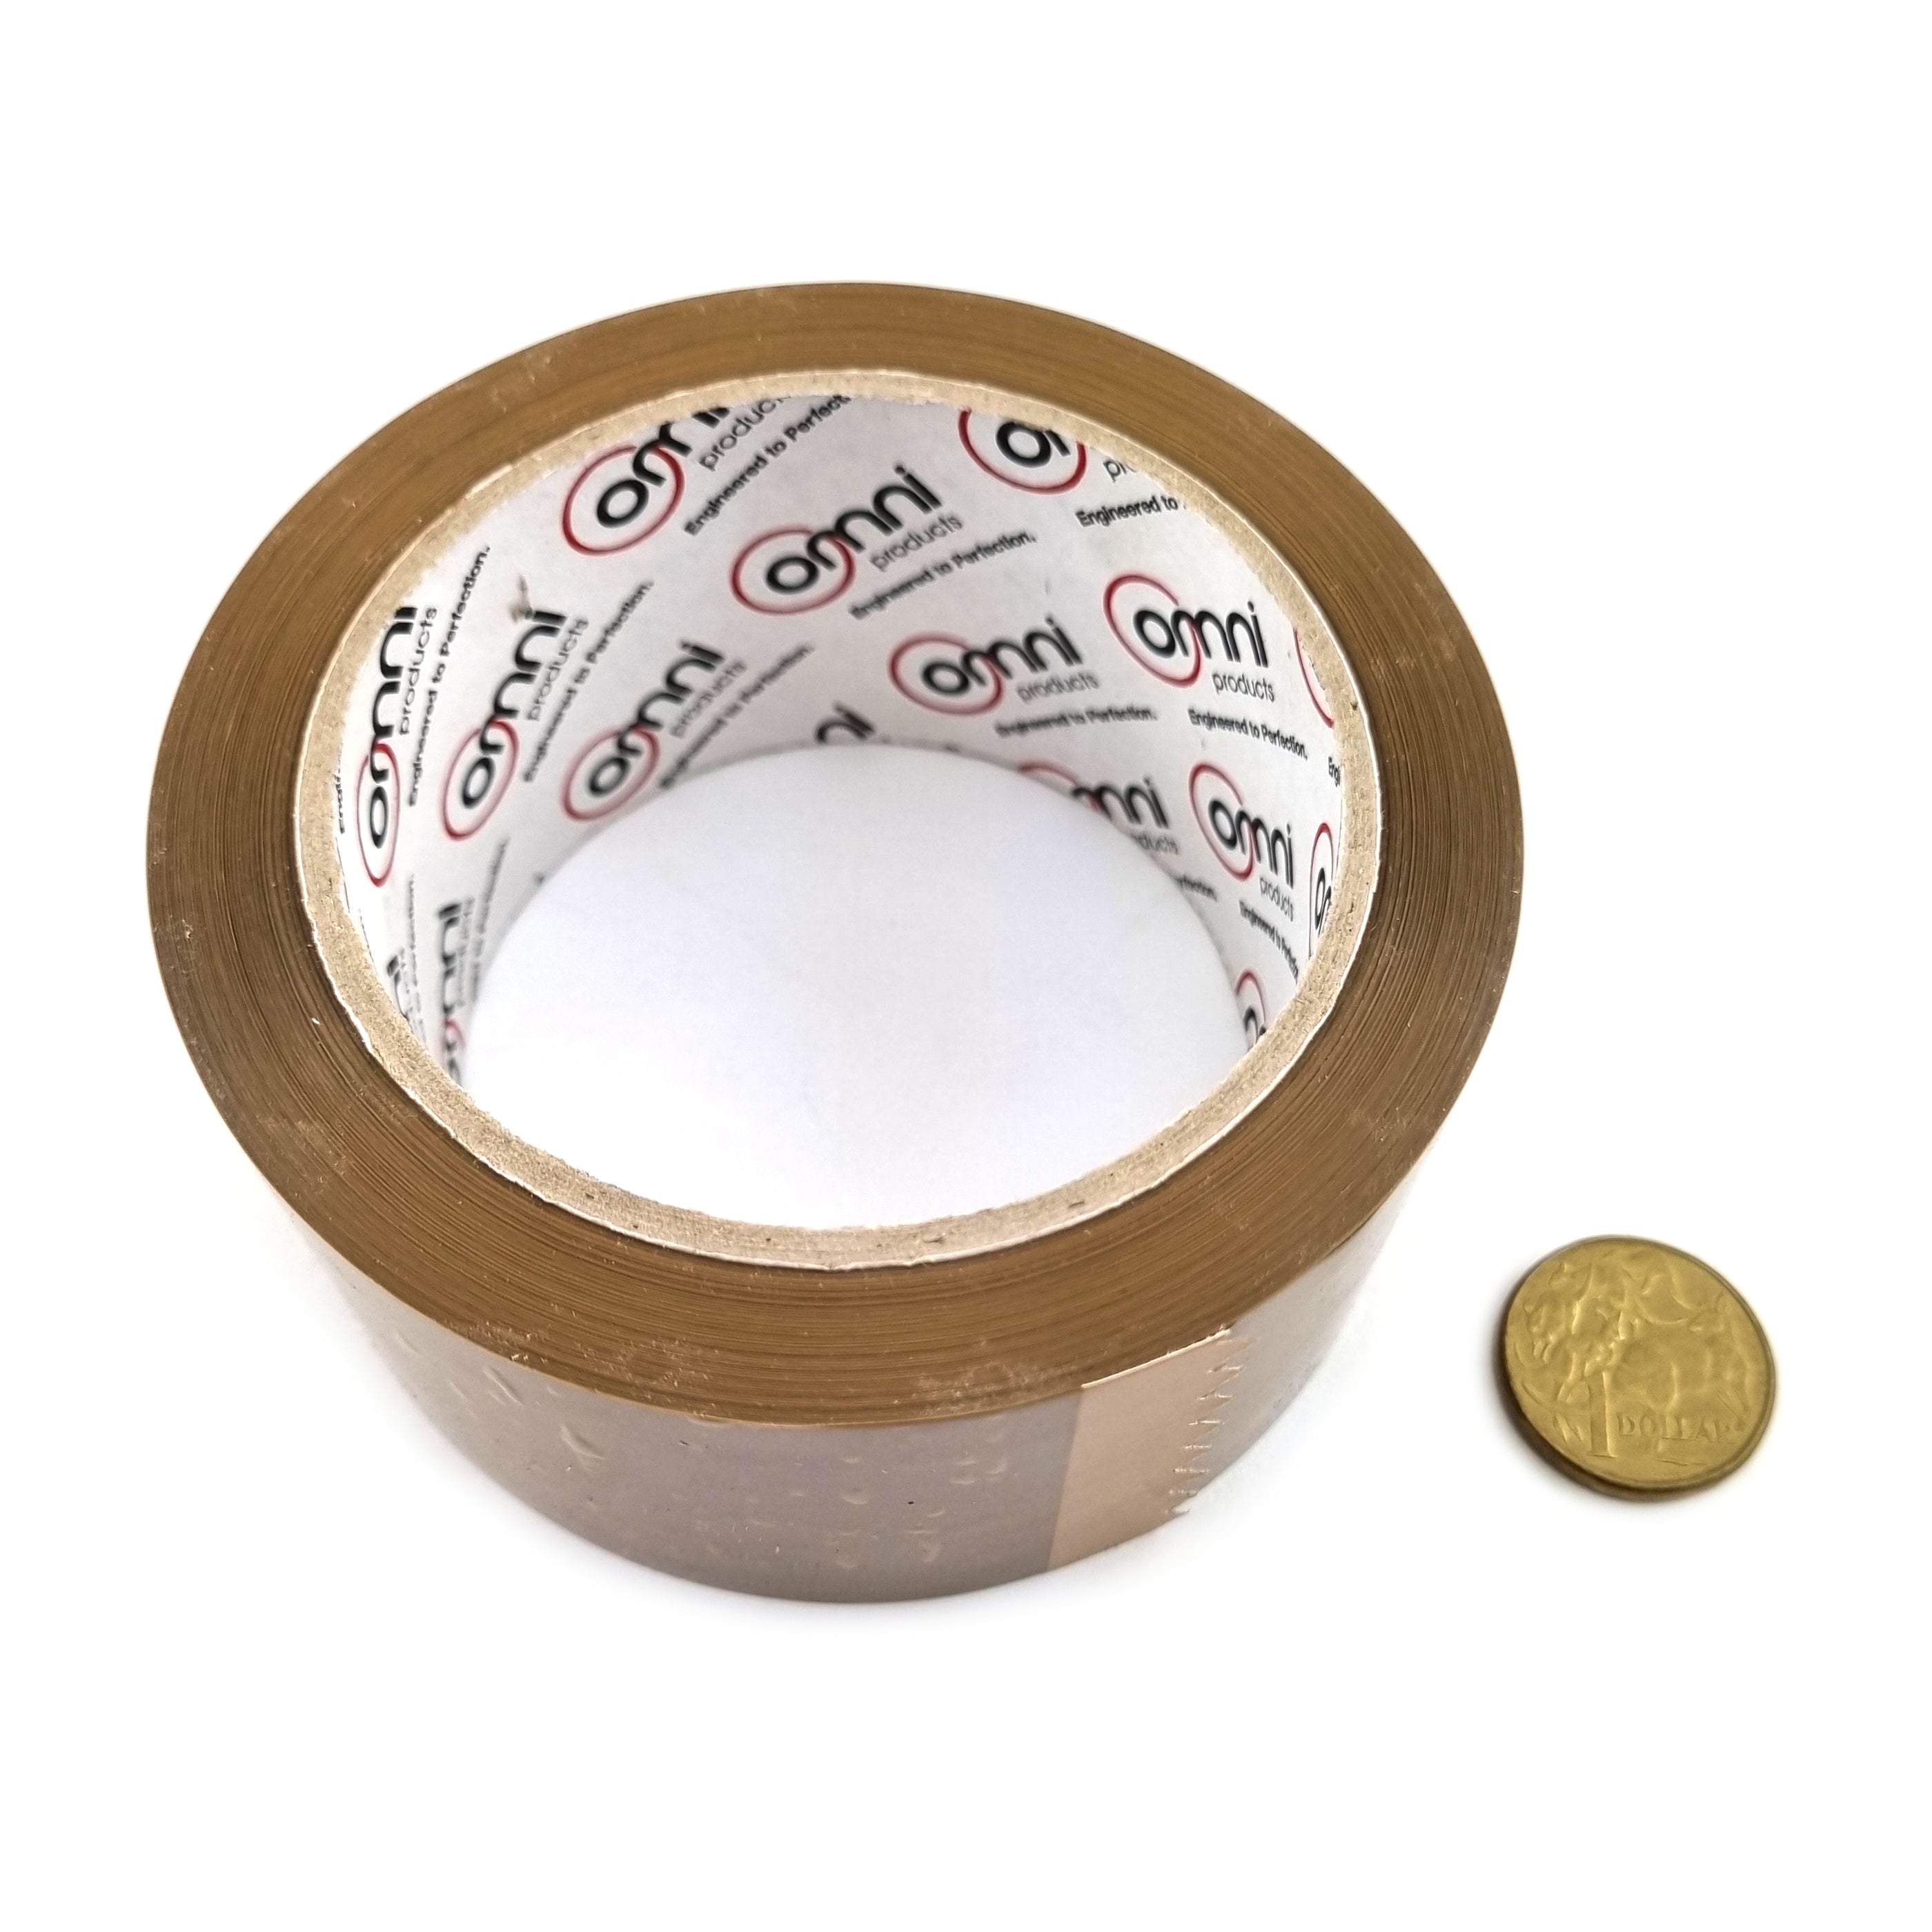 Bulk buy general sticky tape in a box of 36, roll size: 50mm wide x 75m roll.